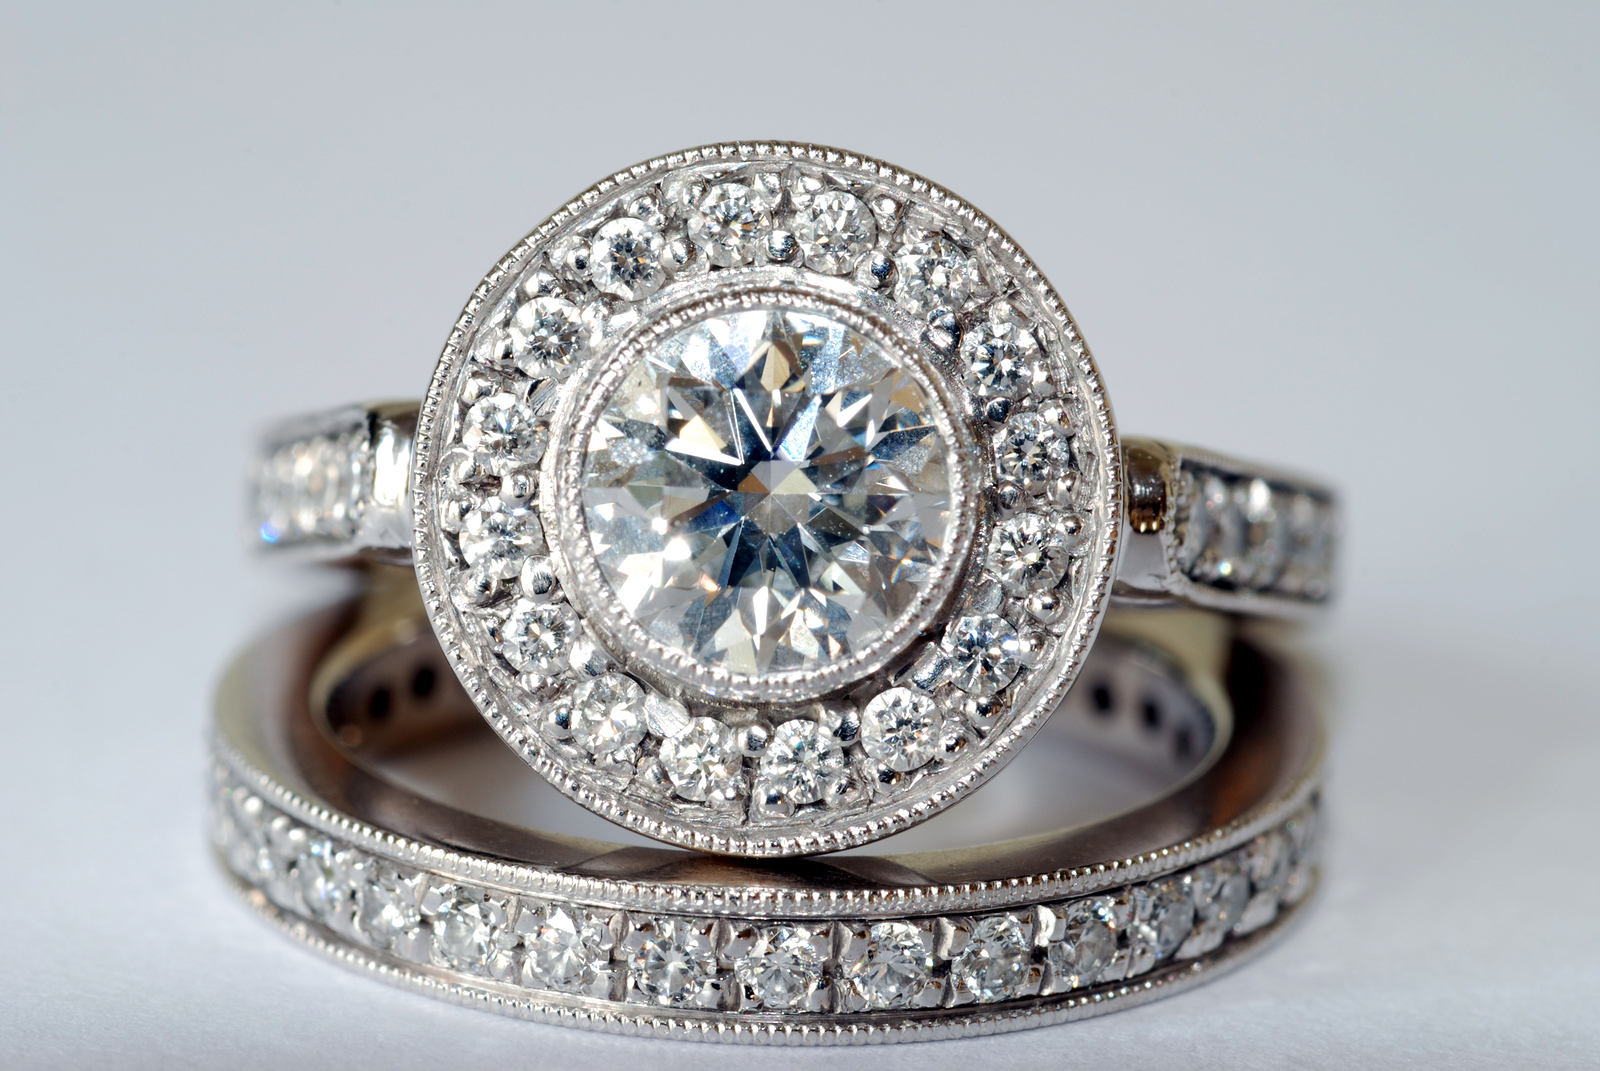 How to Insure Your Engagement Ring (And Why You Should)